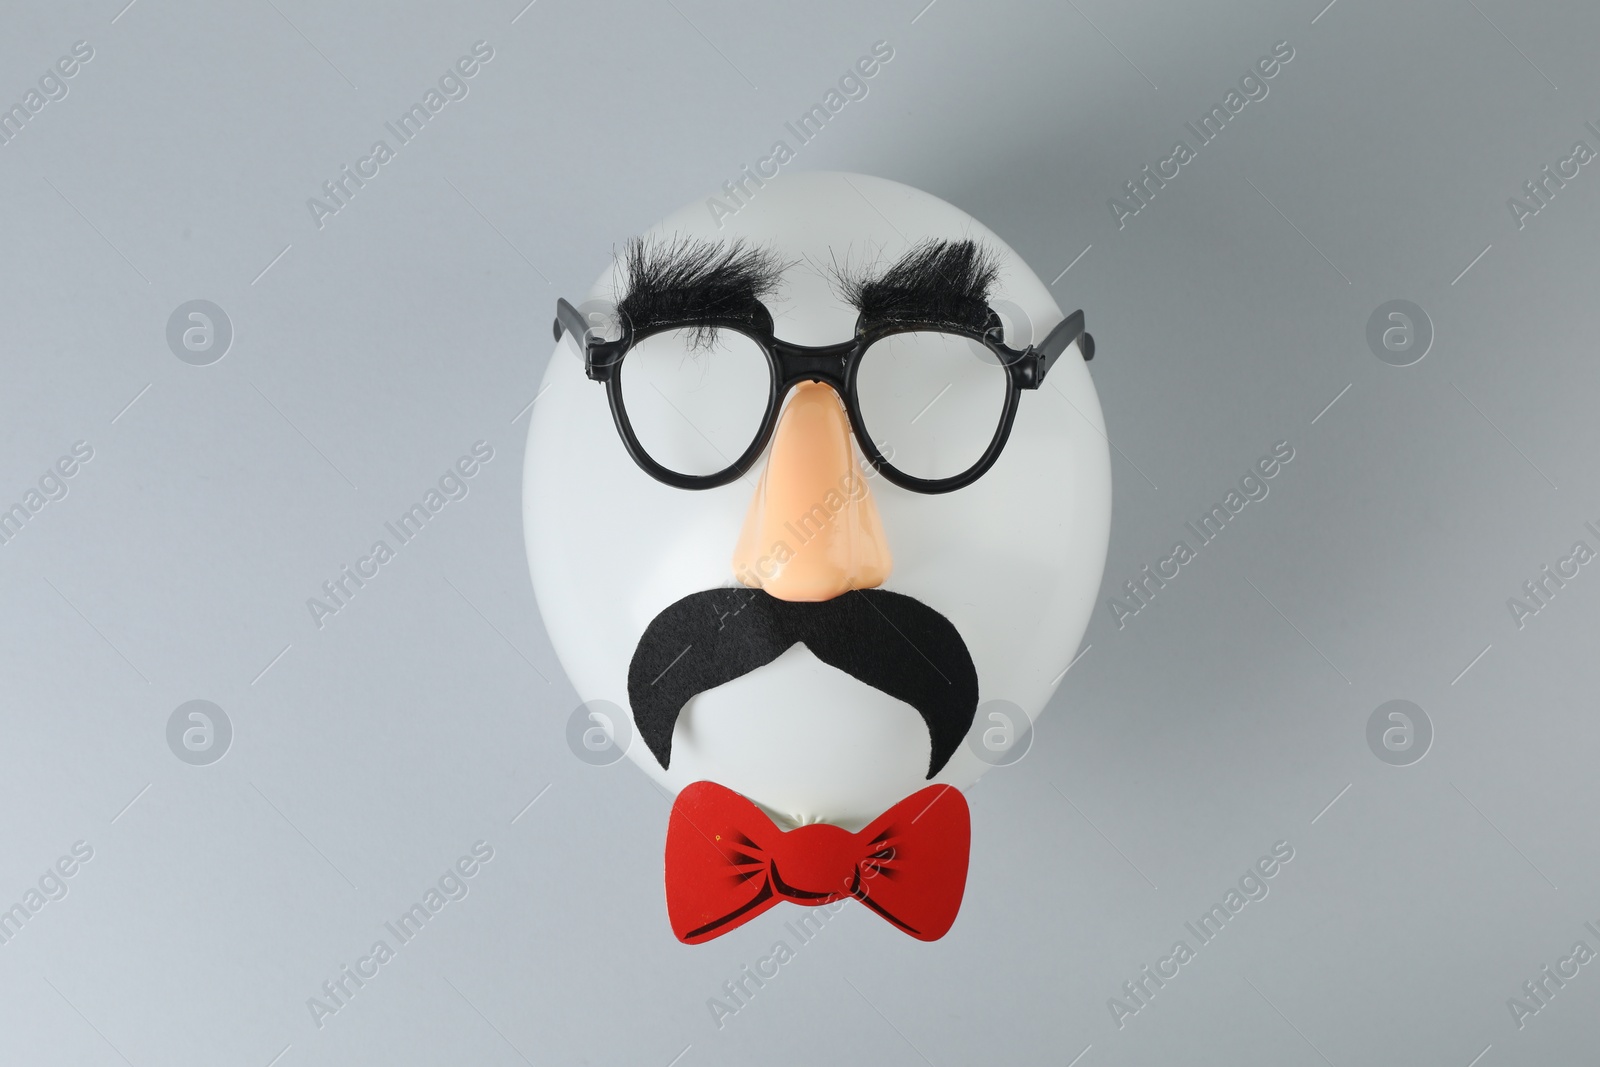 Photo of Man's face made of balloon, funny mask with fake mustache, nose and glasses on grey background, top view